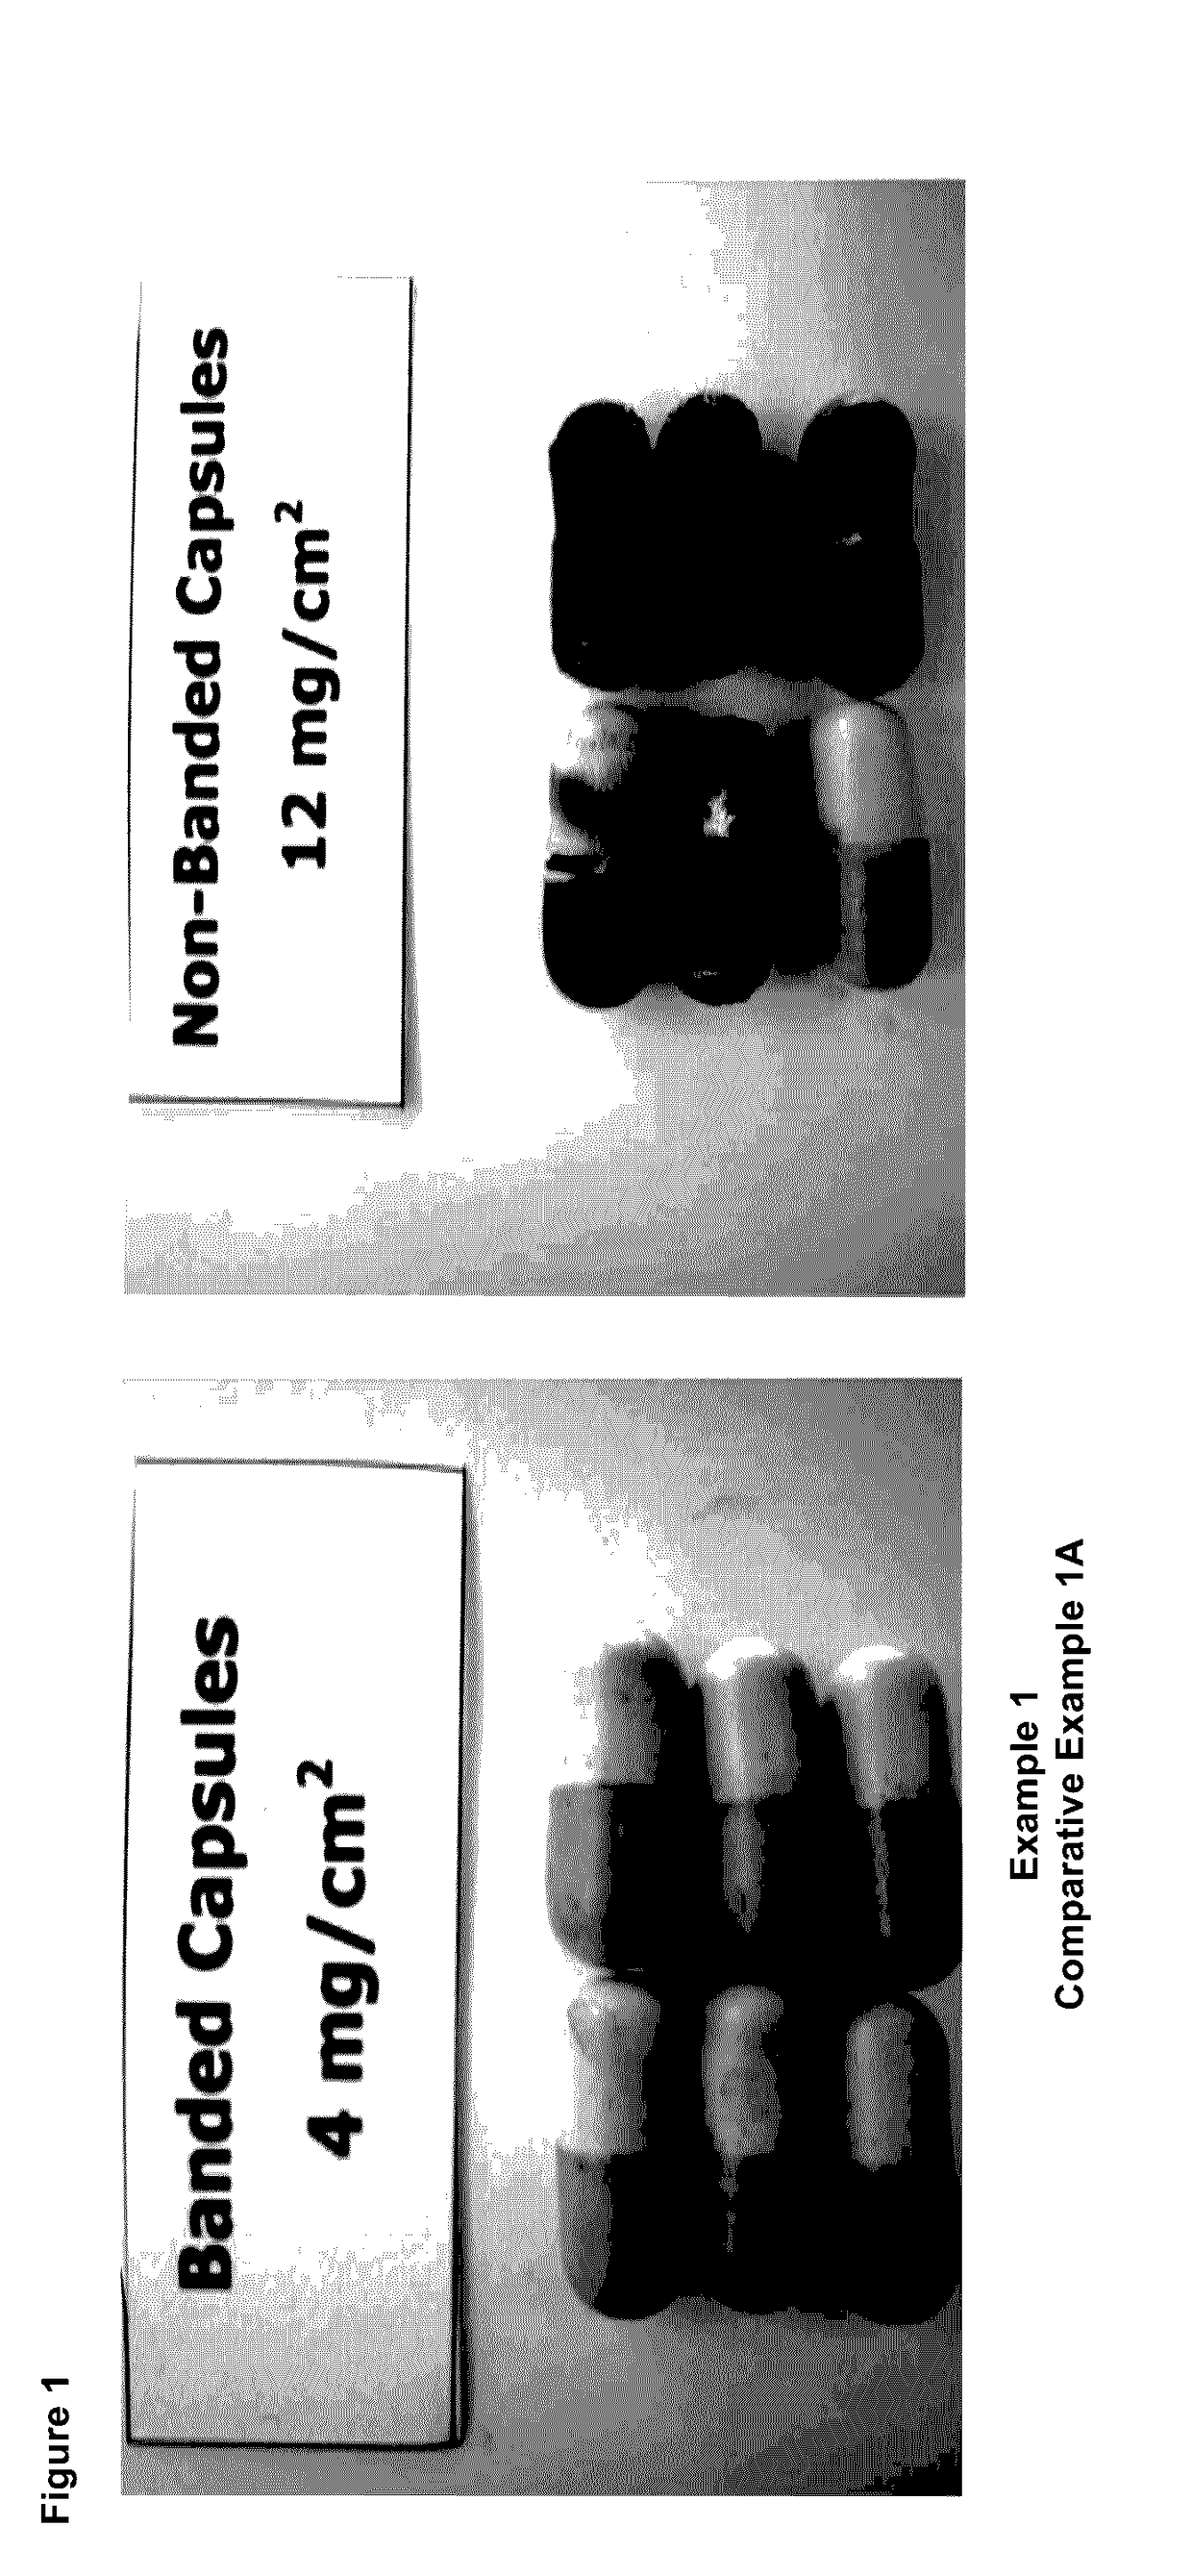 Modified release coated capsules